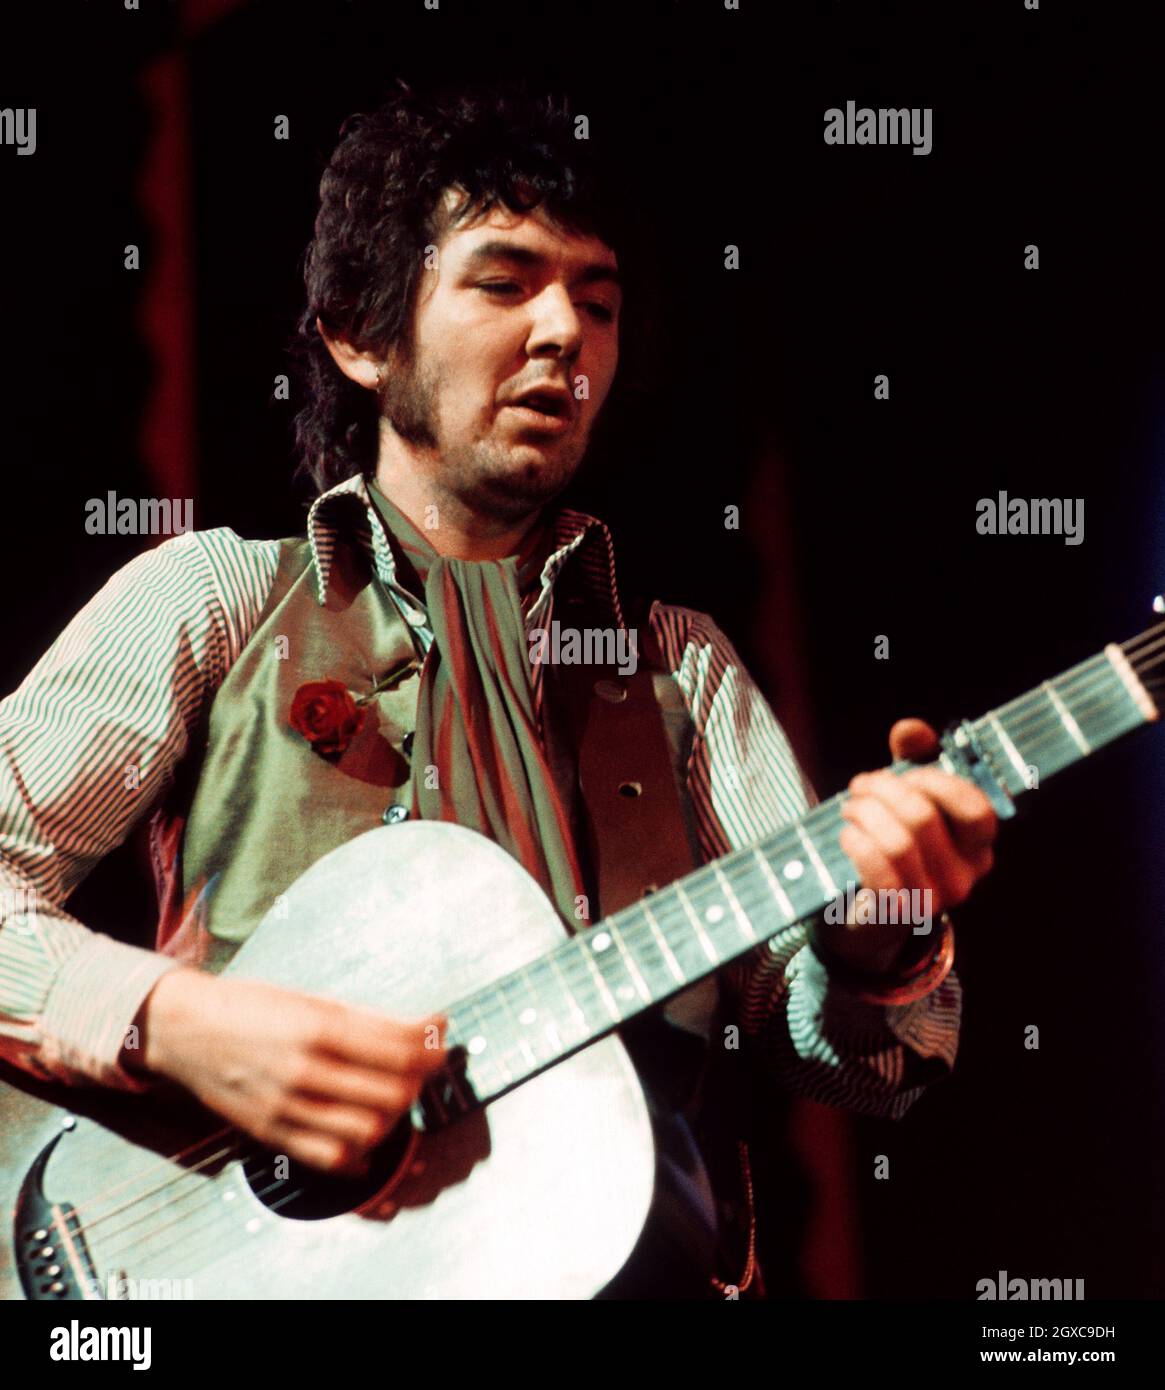 Briitish singer and songwiter, formerly of The Small Faces and The Faces, Ronnie Lane. Stock Photo